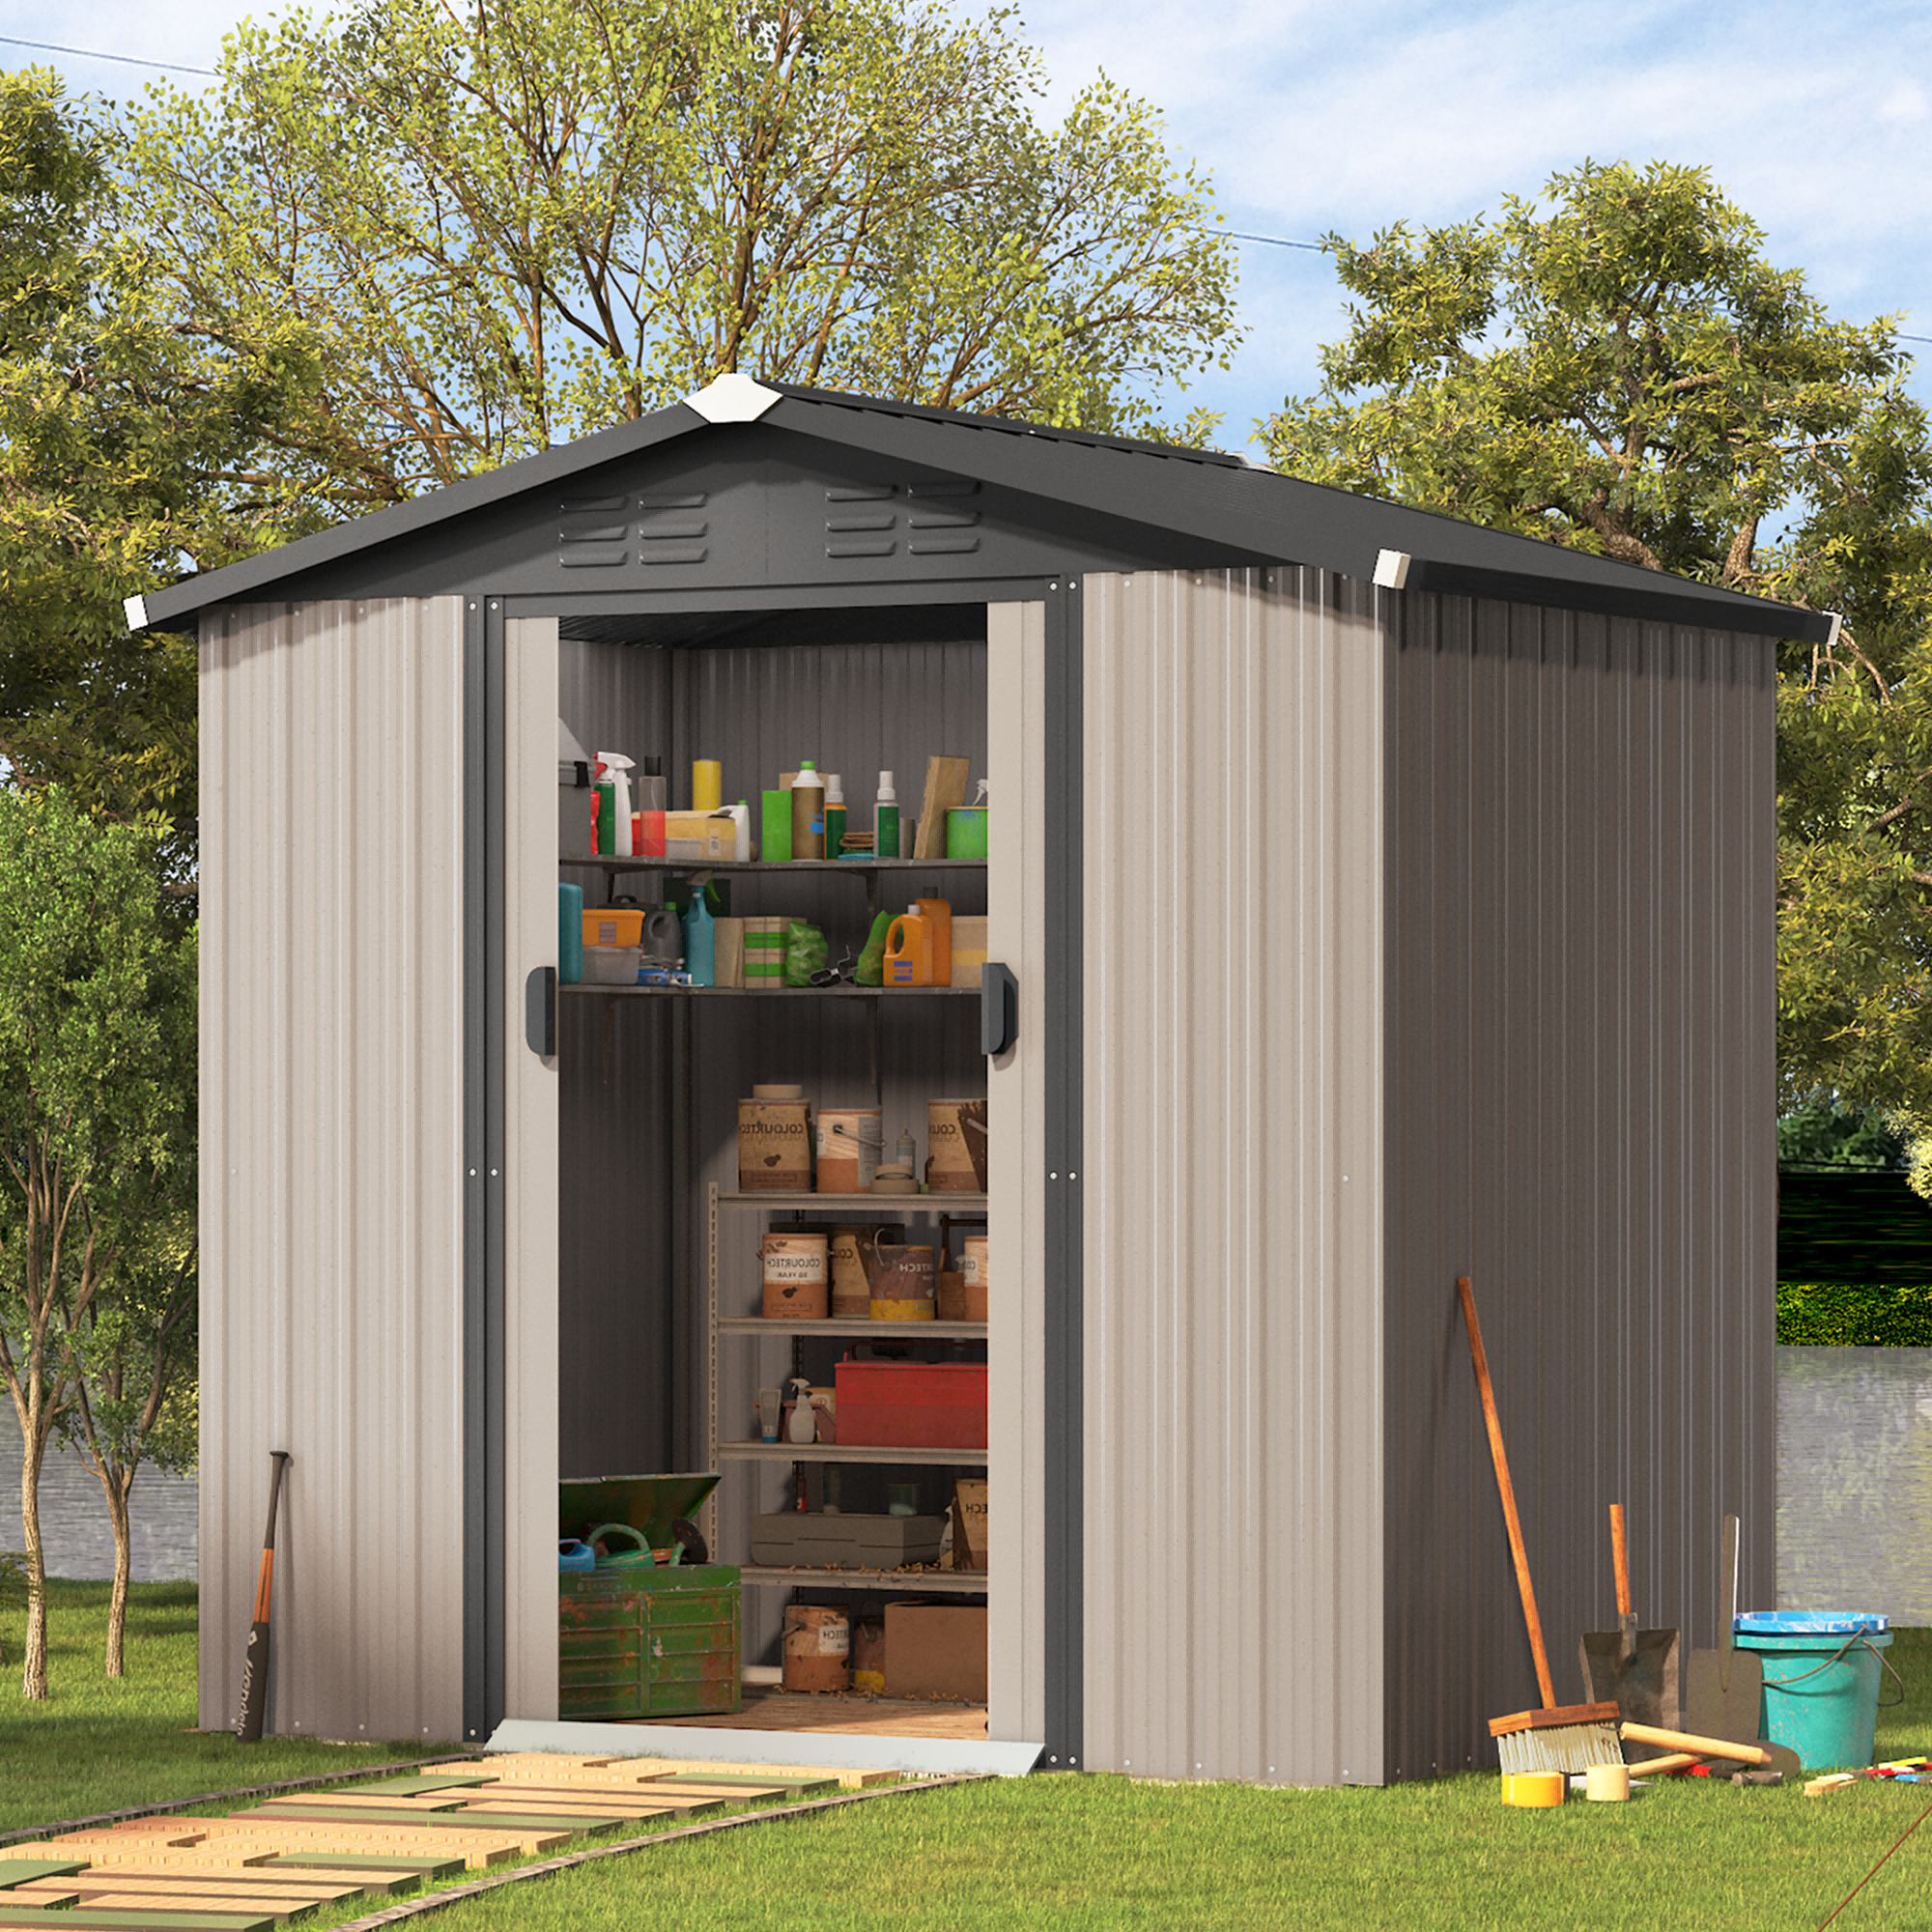 AECOJOY 6 x 4 ft. Outdoor Metal Storage Shed with Sliding Door - image 1 of 10